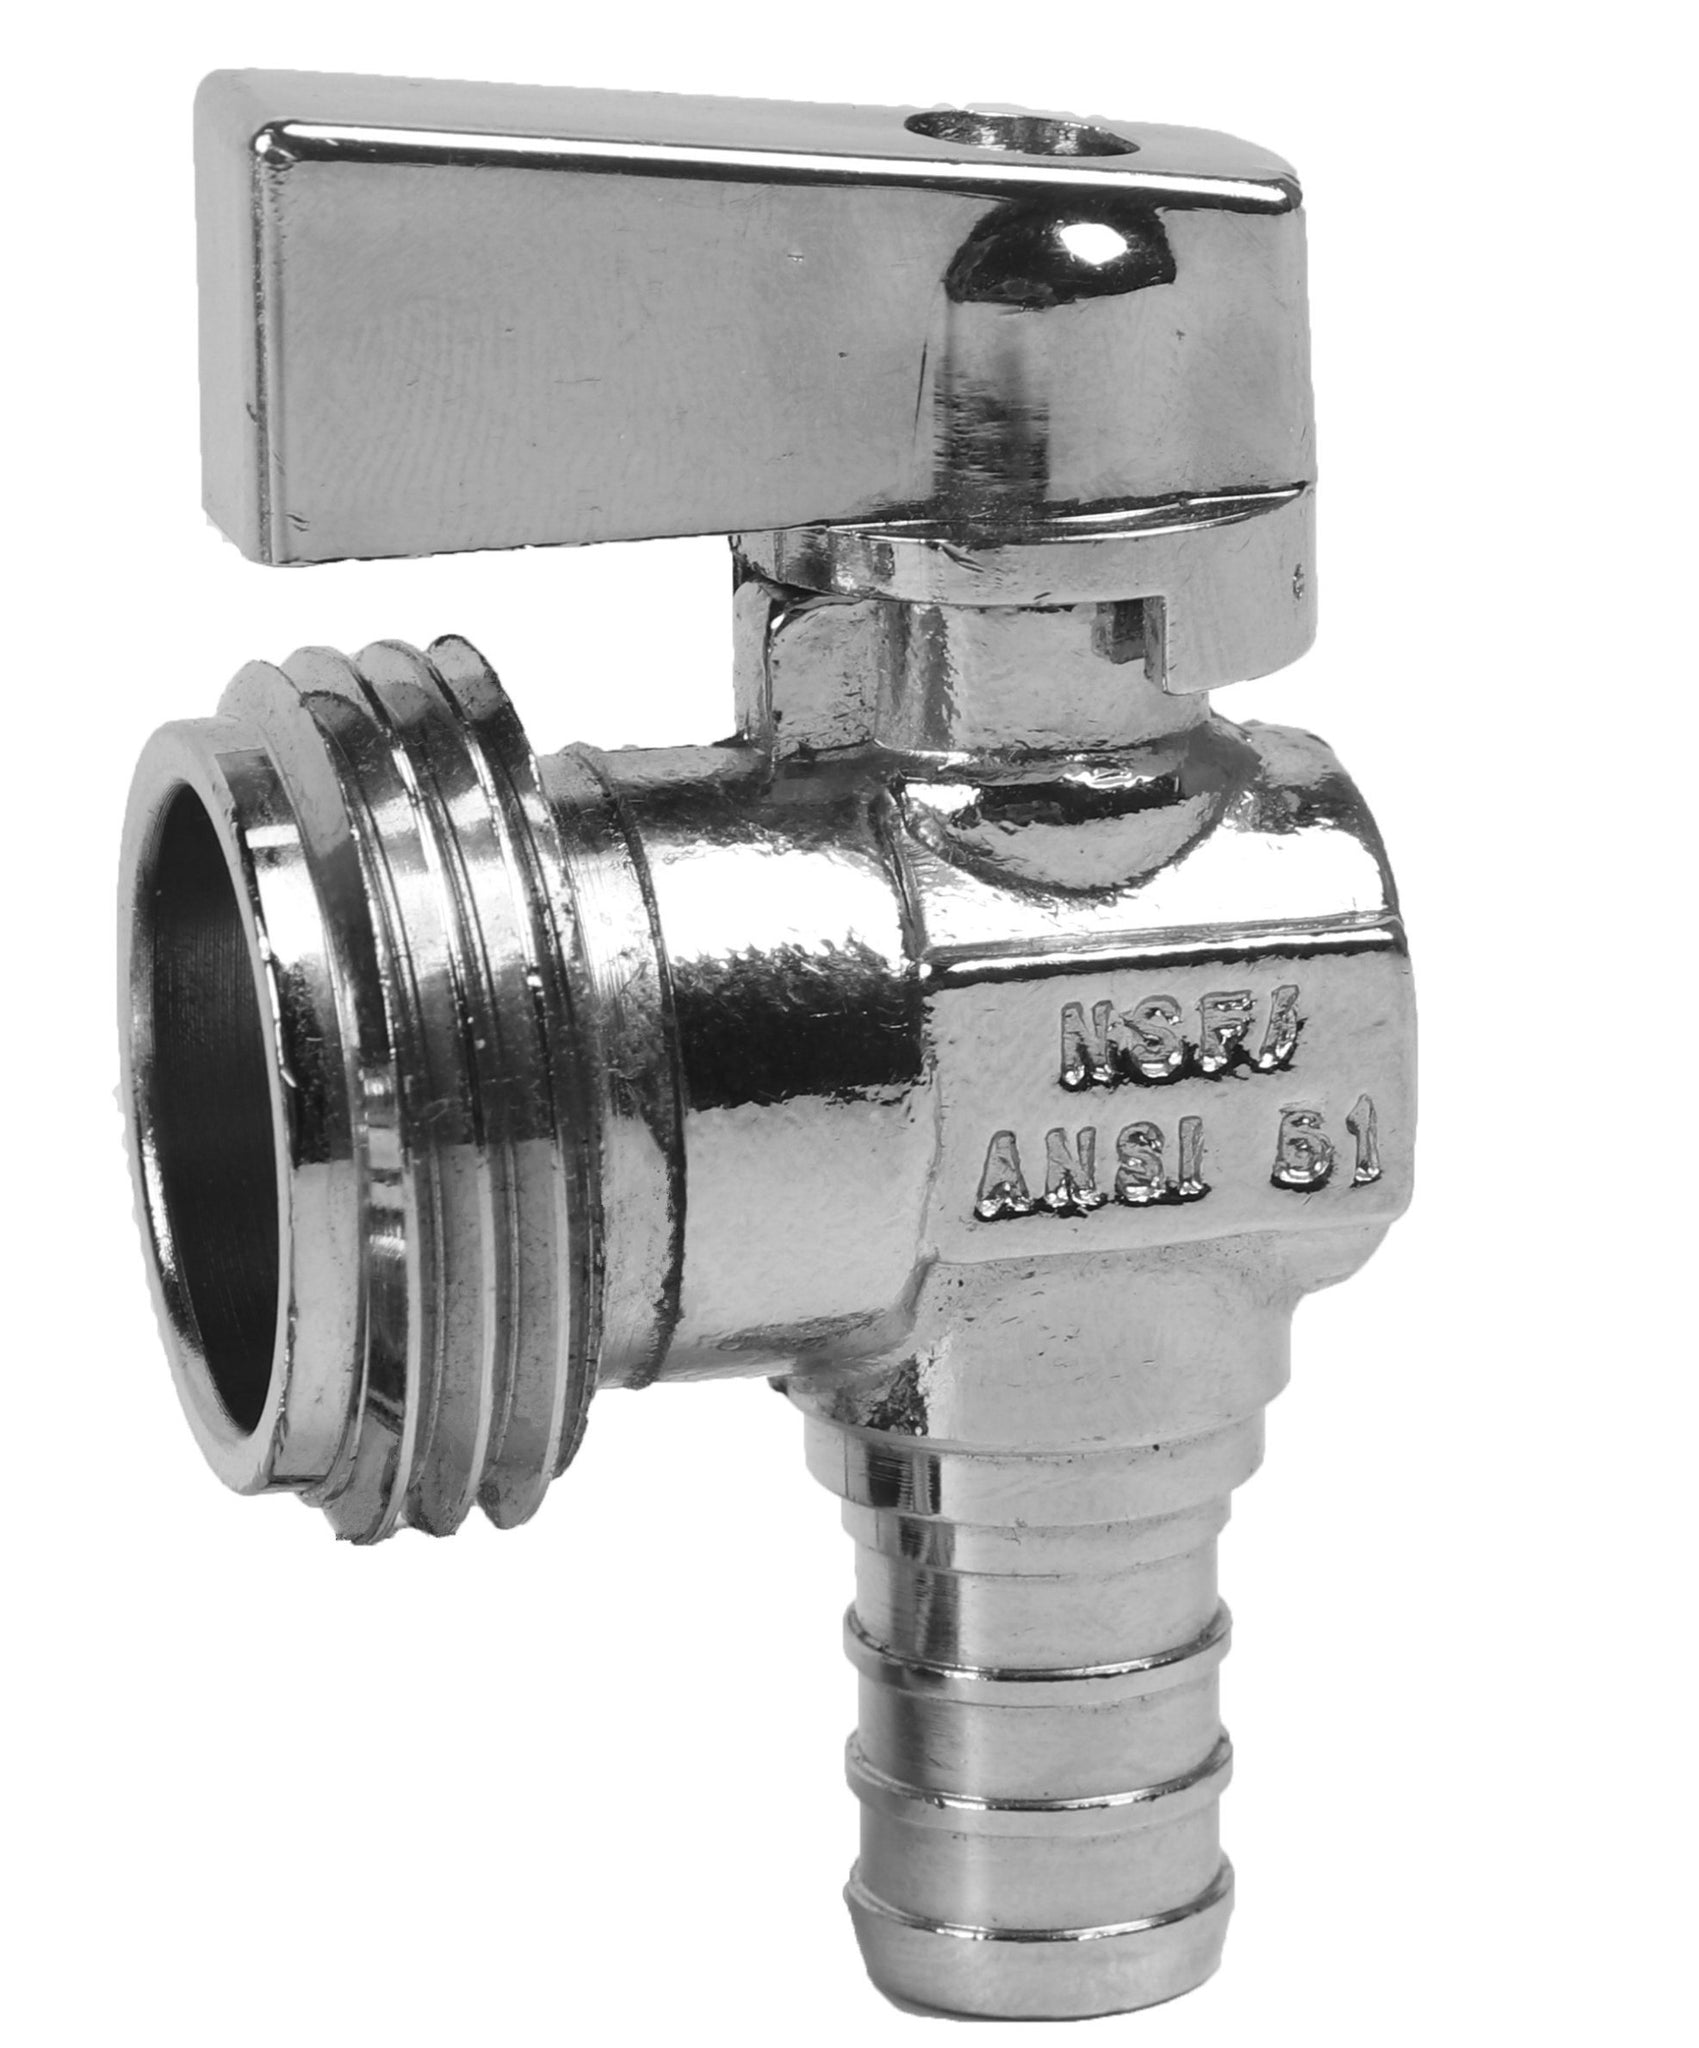  SUNGATOR 12 Pack Pex Valves 3/4 inch, Pex Ball Valve Brass Full  Port Quarter Turn Shut Off Valve for Hot and Cold Water, ASTM F1807 For Pex  Pipe, CUPC Certified 